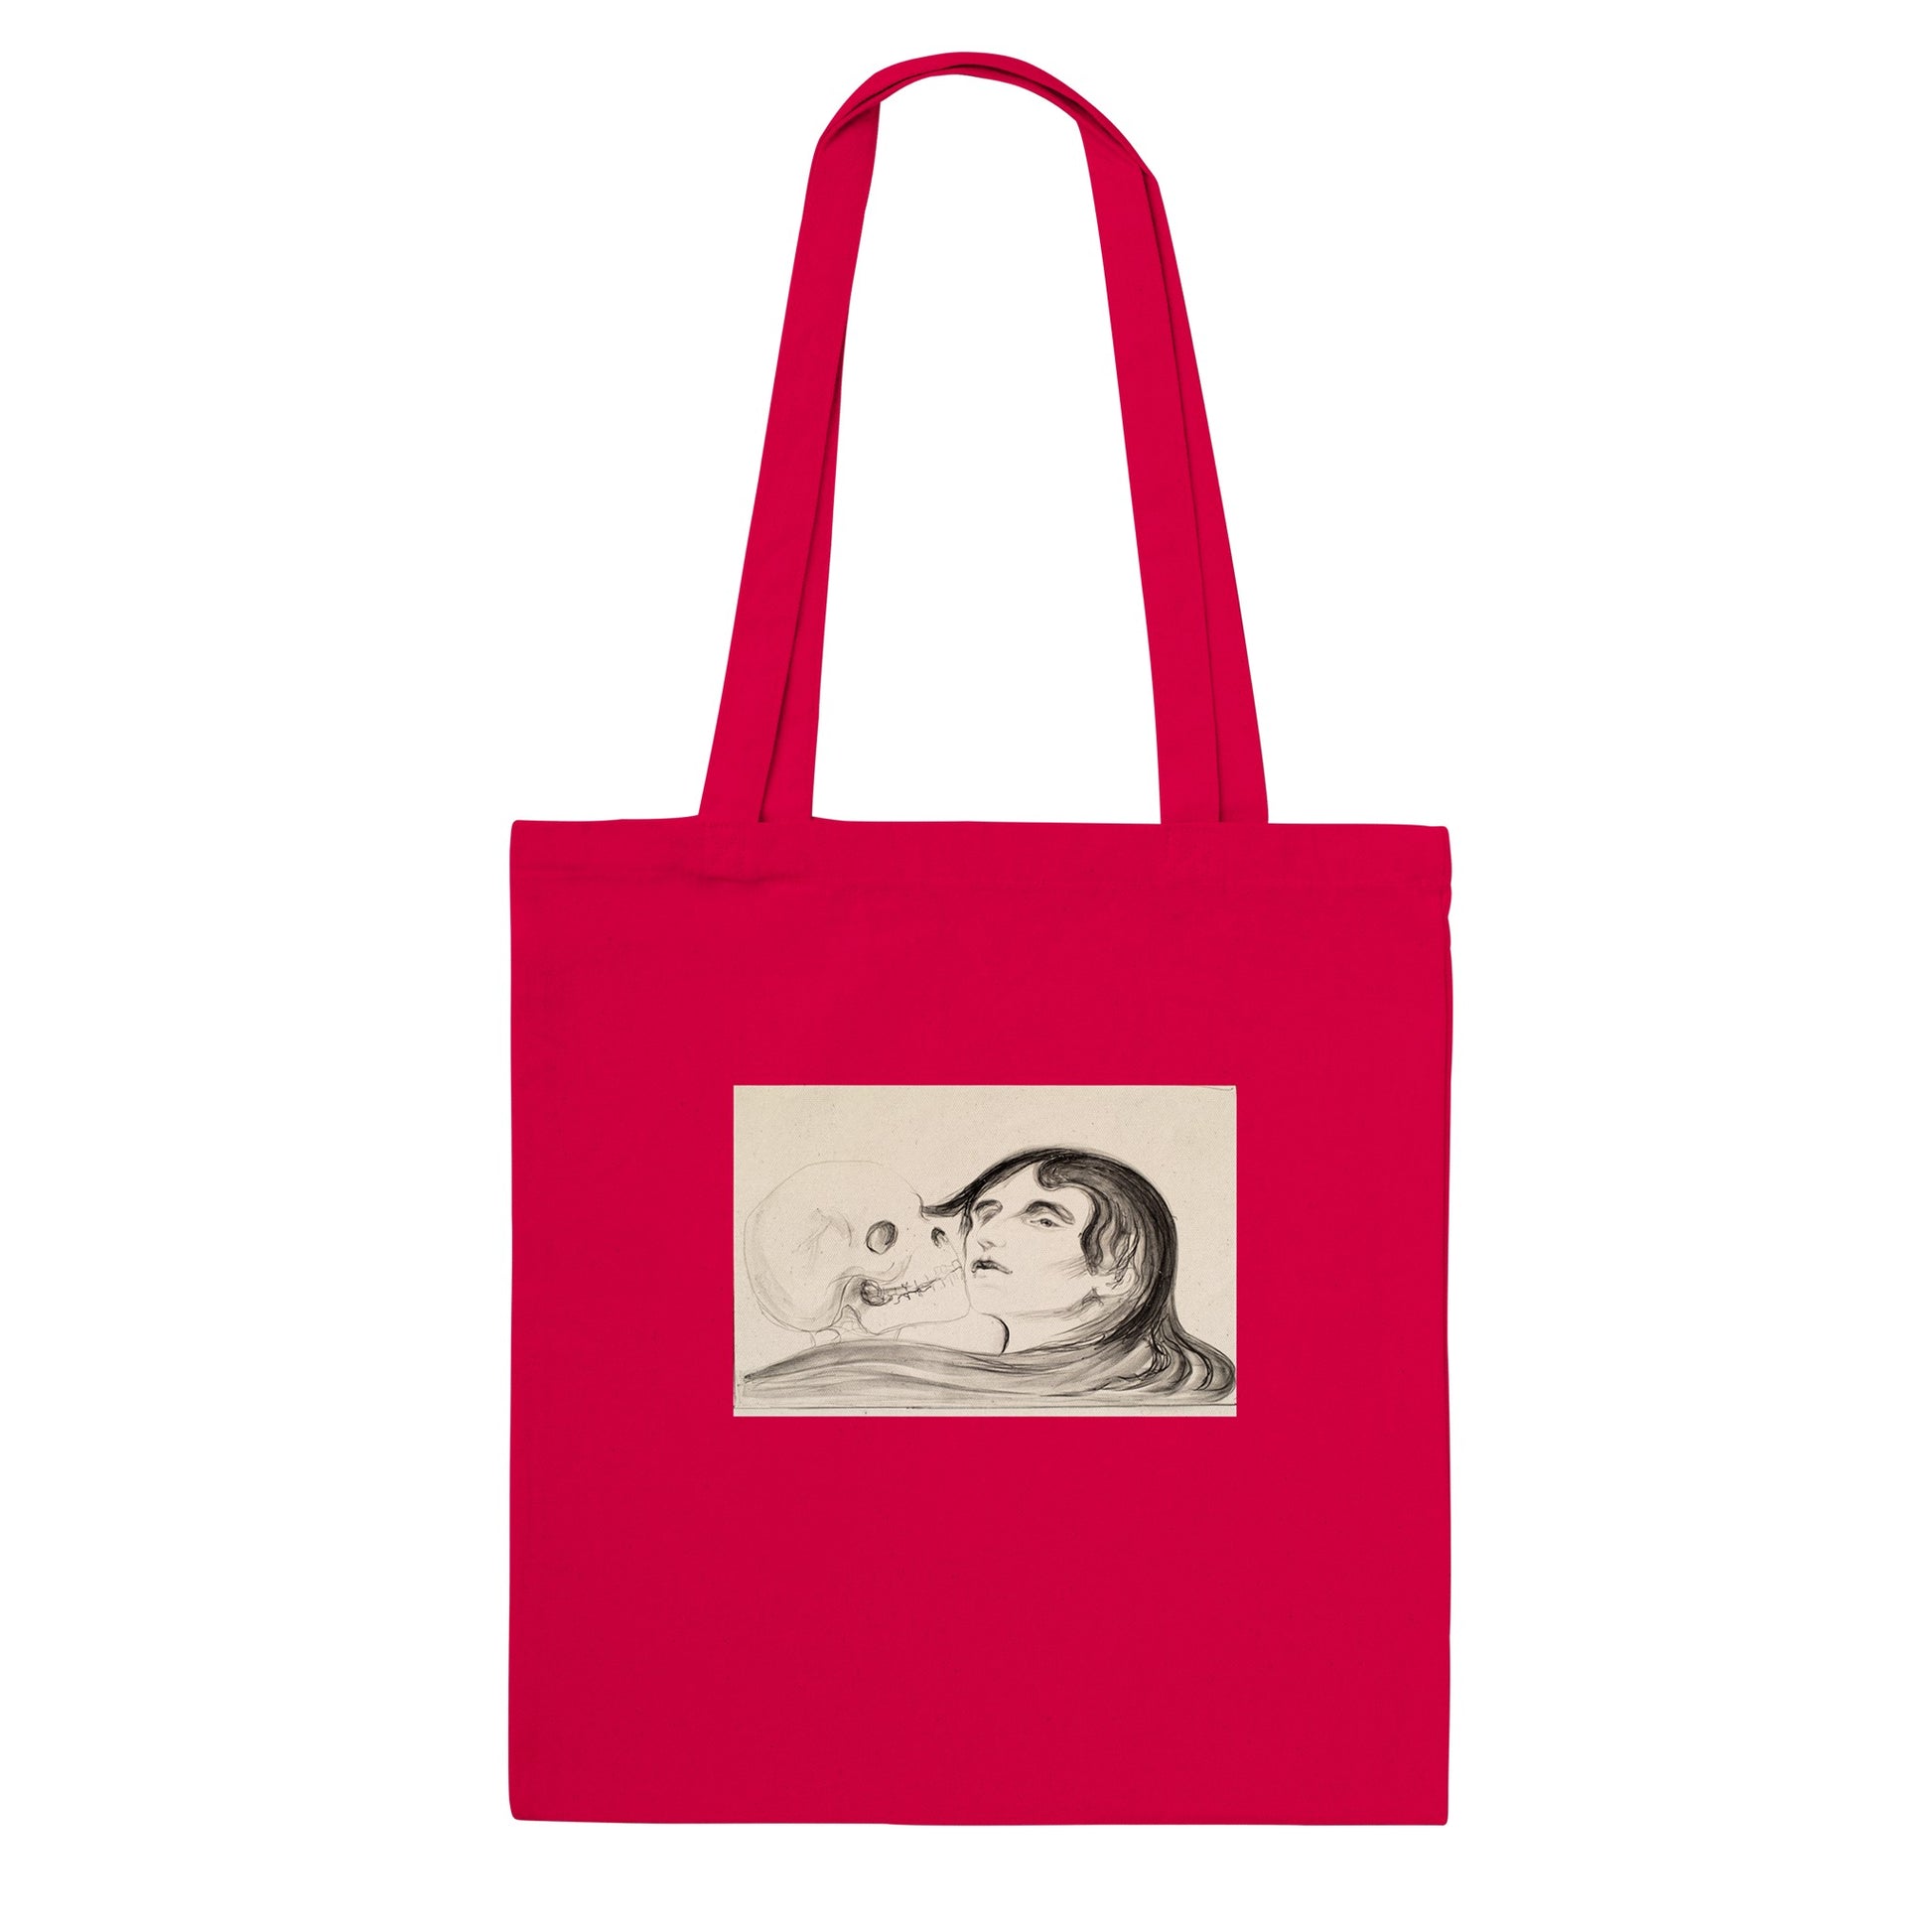 7EDVARD MUNCH - THE KISS OF DEATH - CLASSIC TOTE BAG